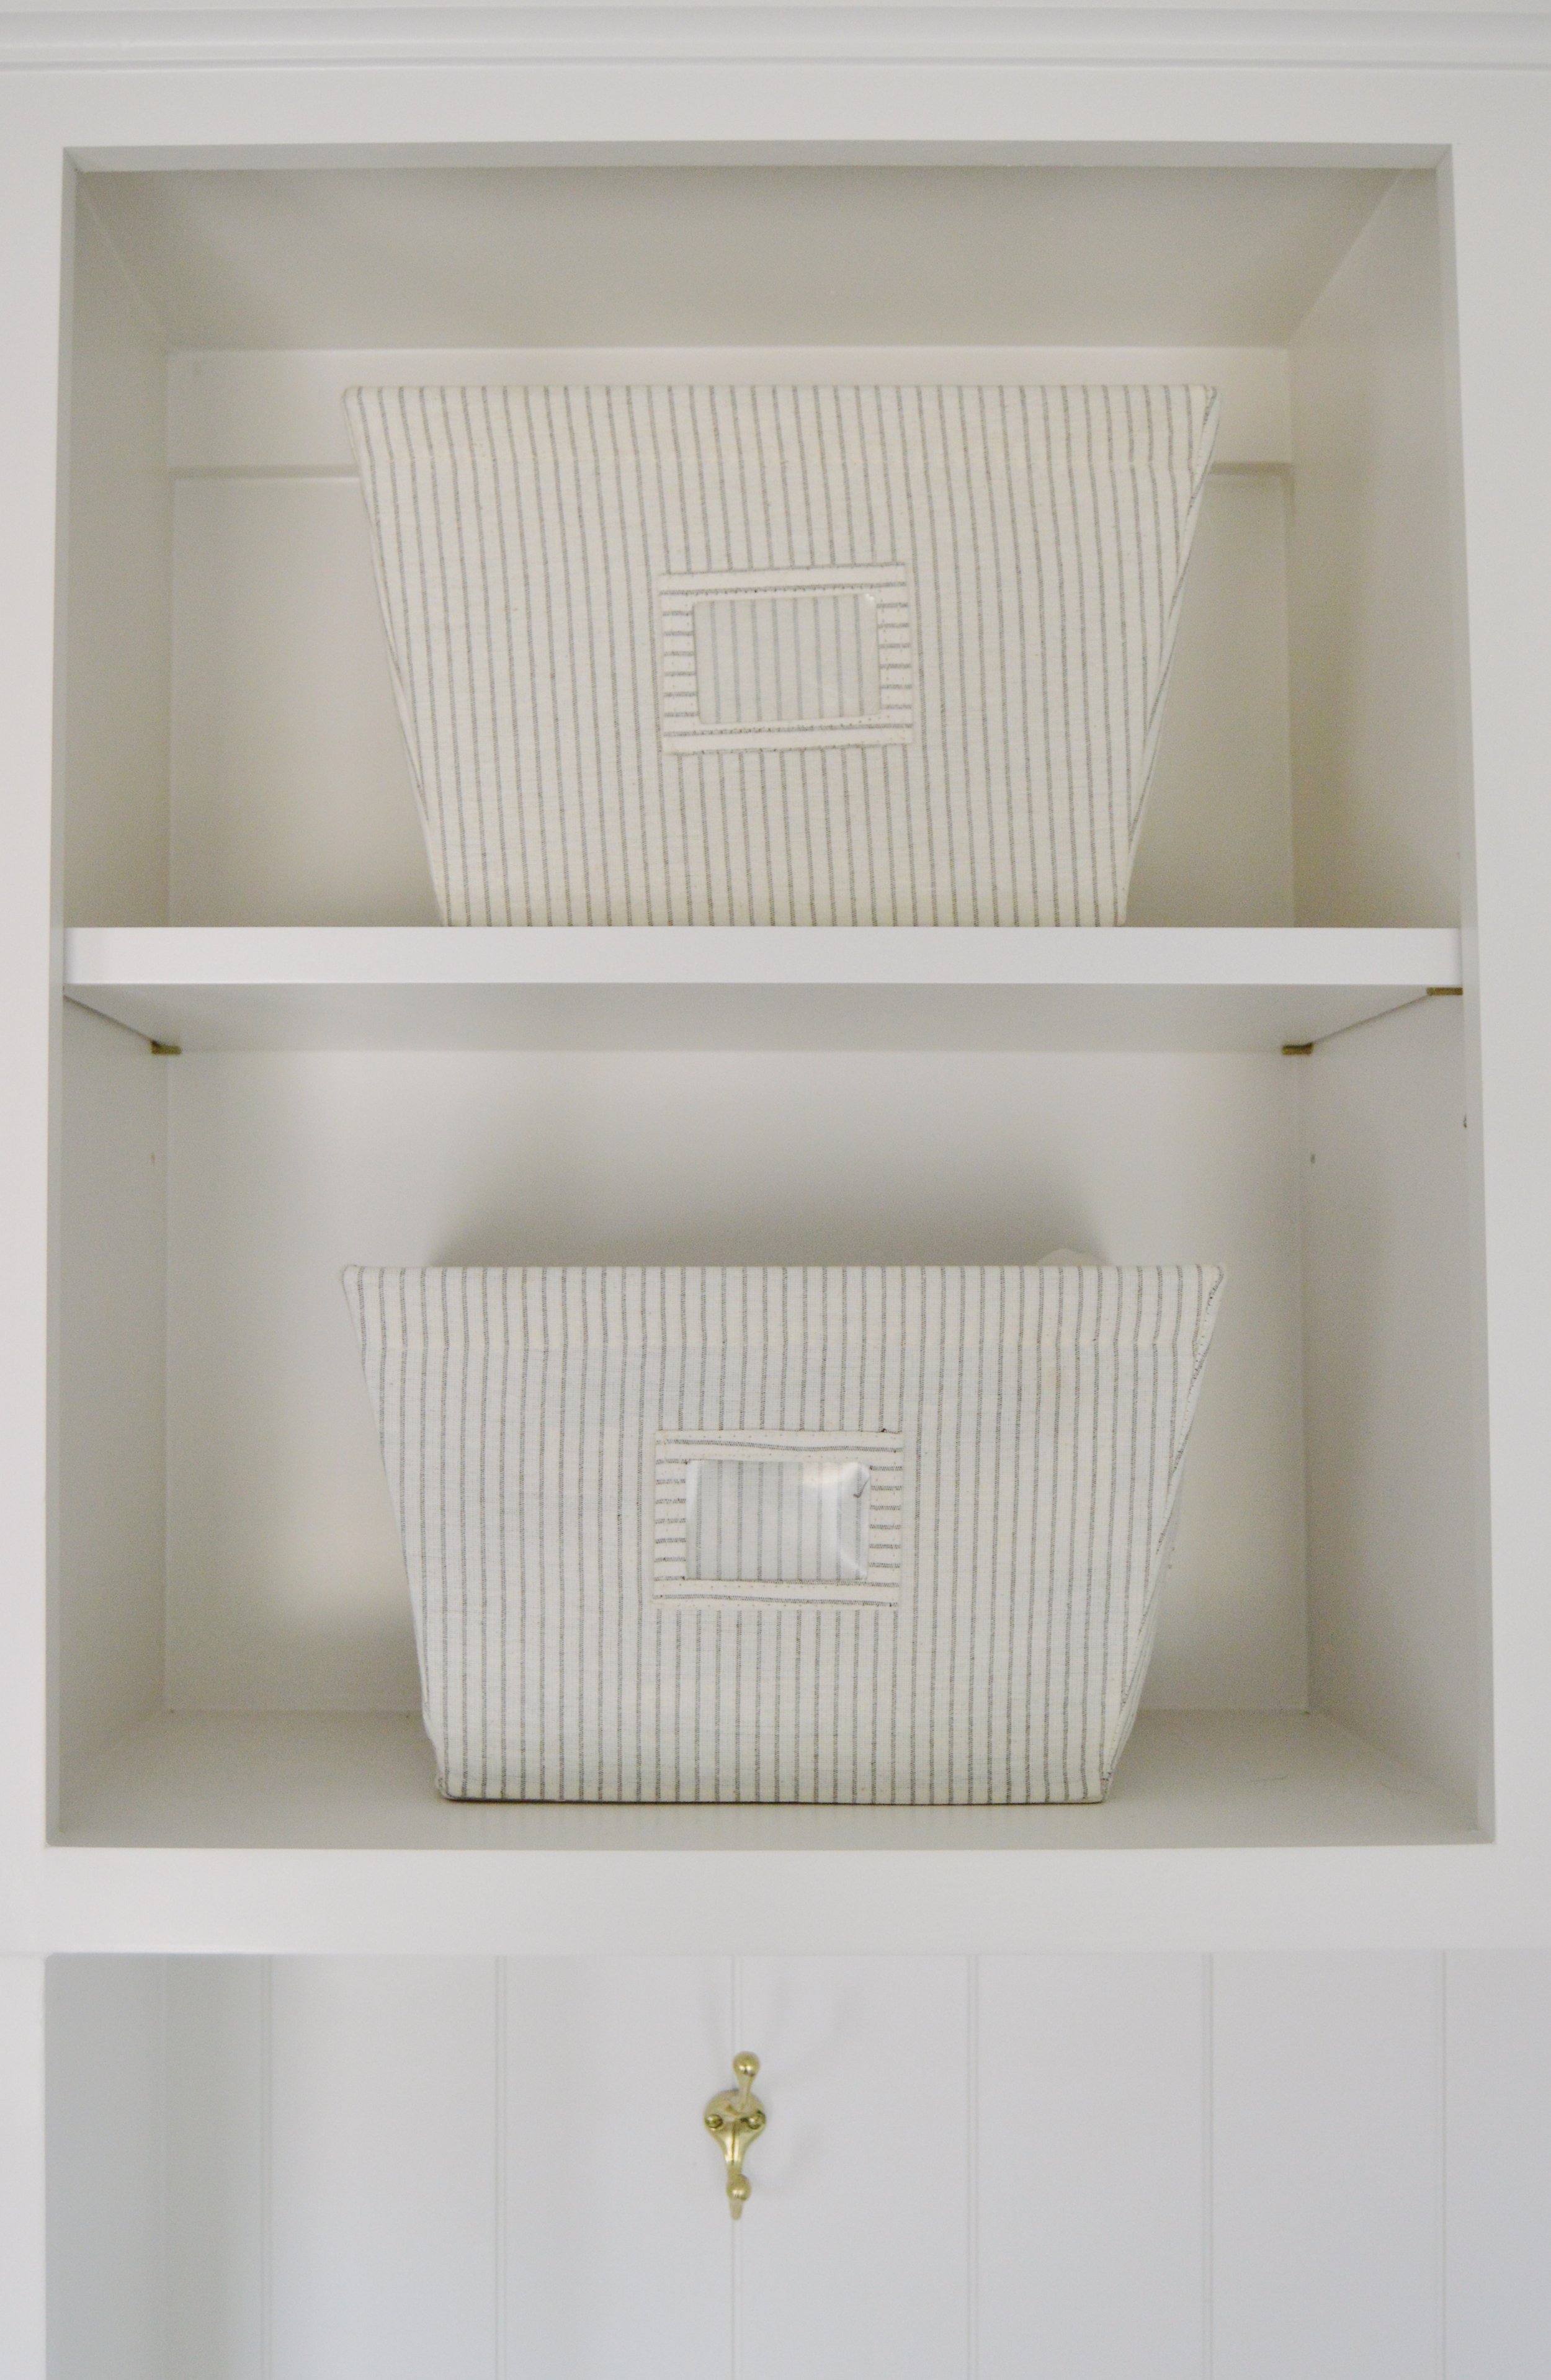  In our Mudroom (reveal coming soon!) I used these striped linen bins to store dishtowels  